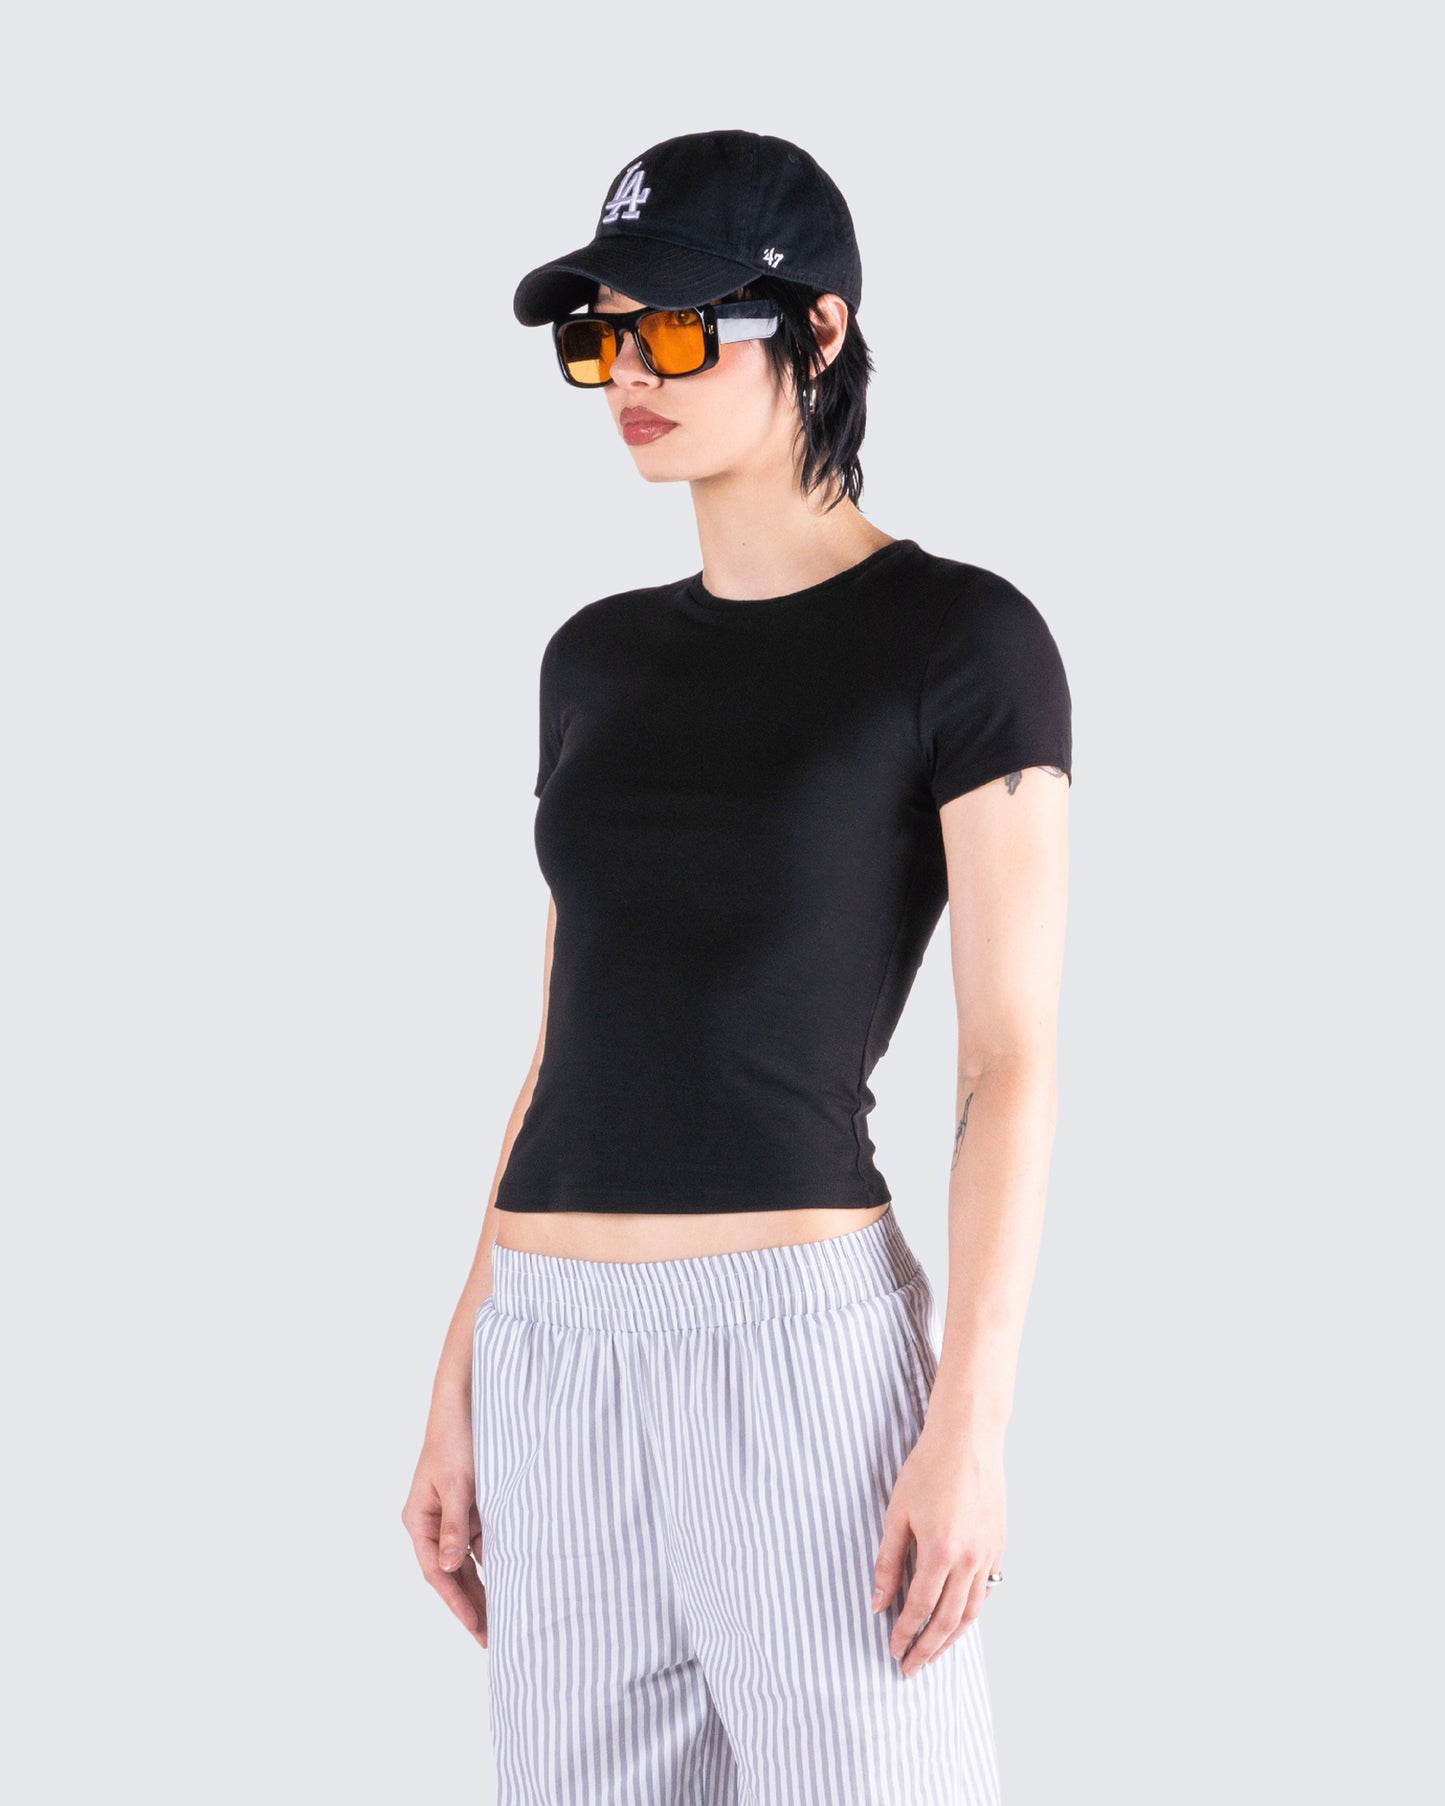 Chell Black Jersey Top